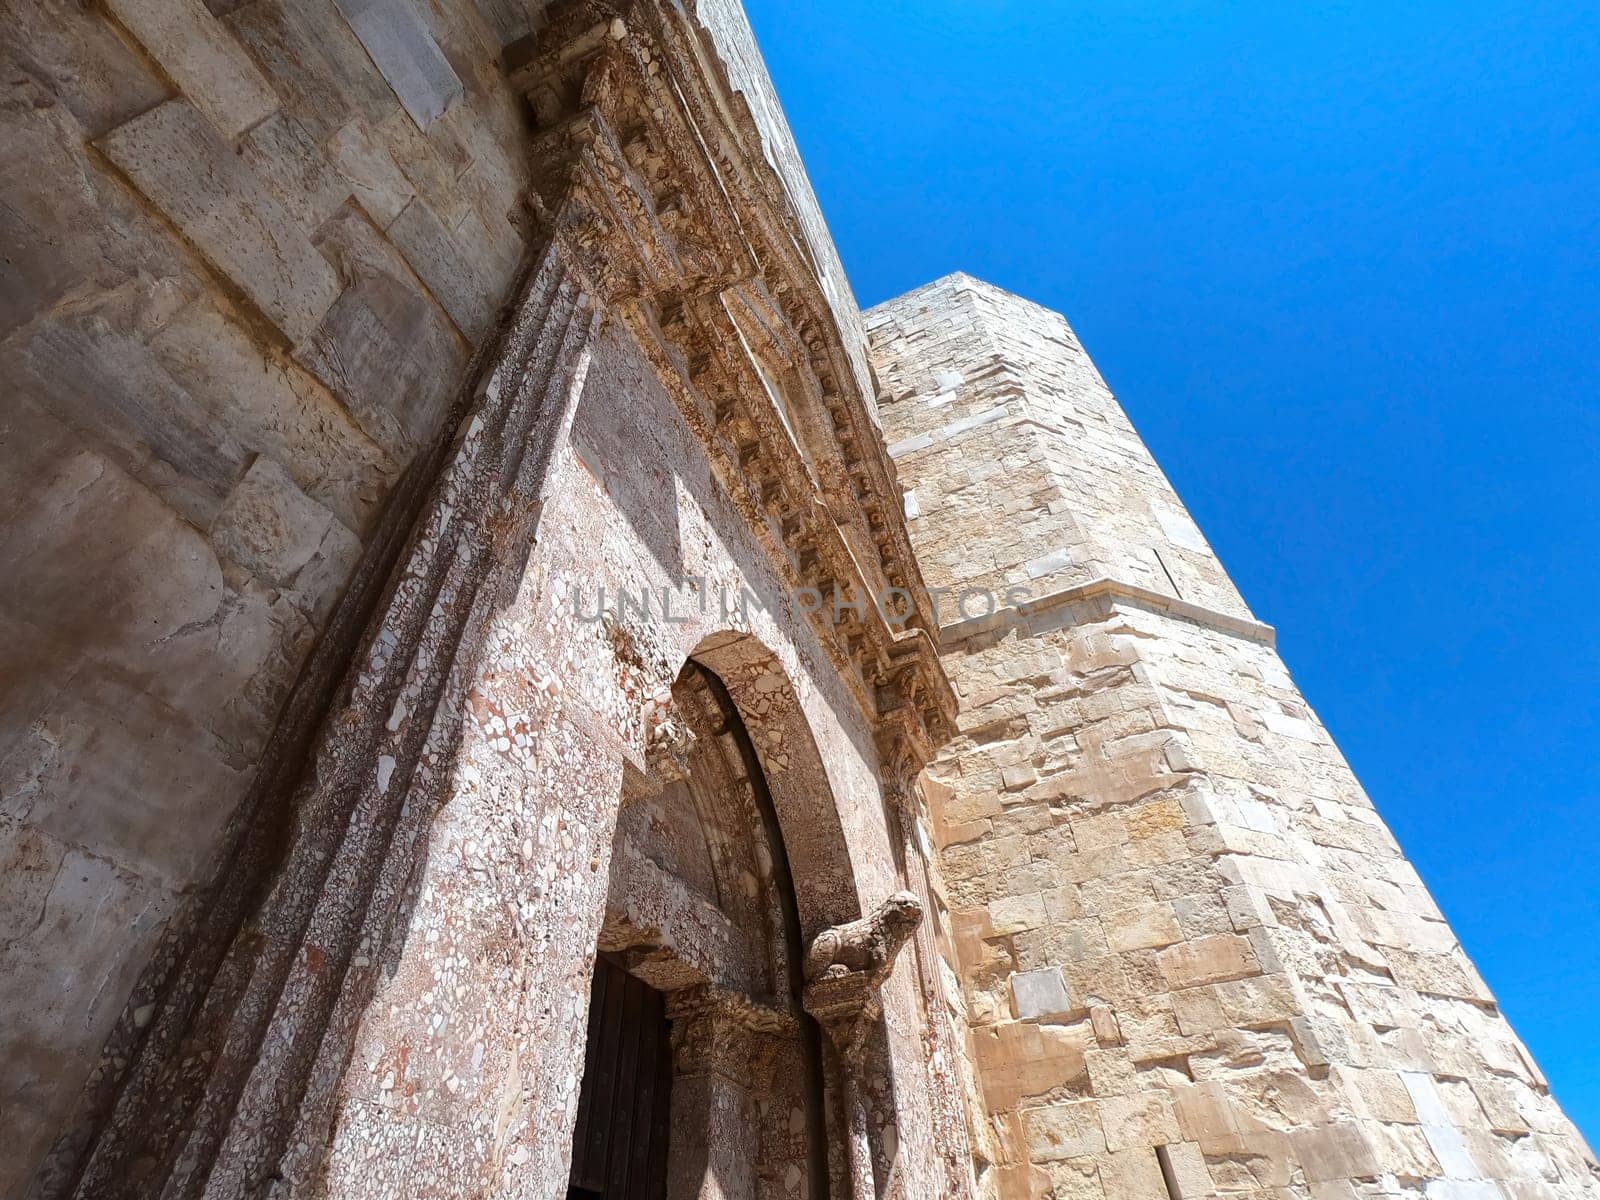 Andria, Puglia, Castel del Monte. Castel del Monte is a thirteenth century fortress built by the Emperor of the Holy Roman Empire Frederick II in the plateau of western Murge, in Puglia.